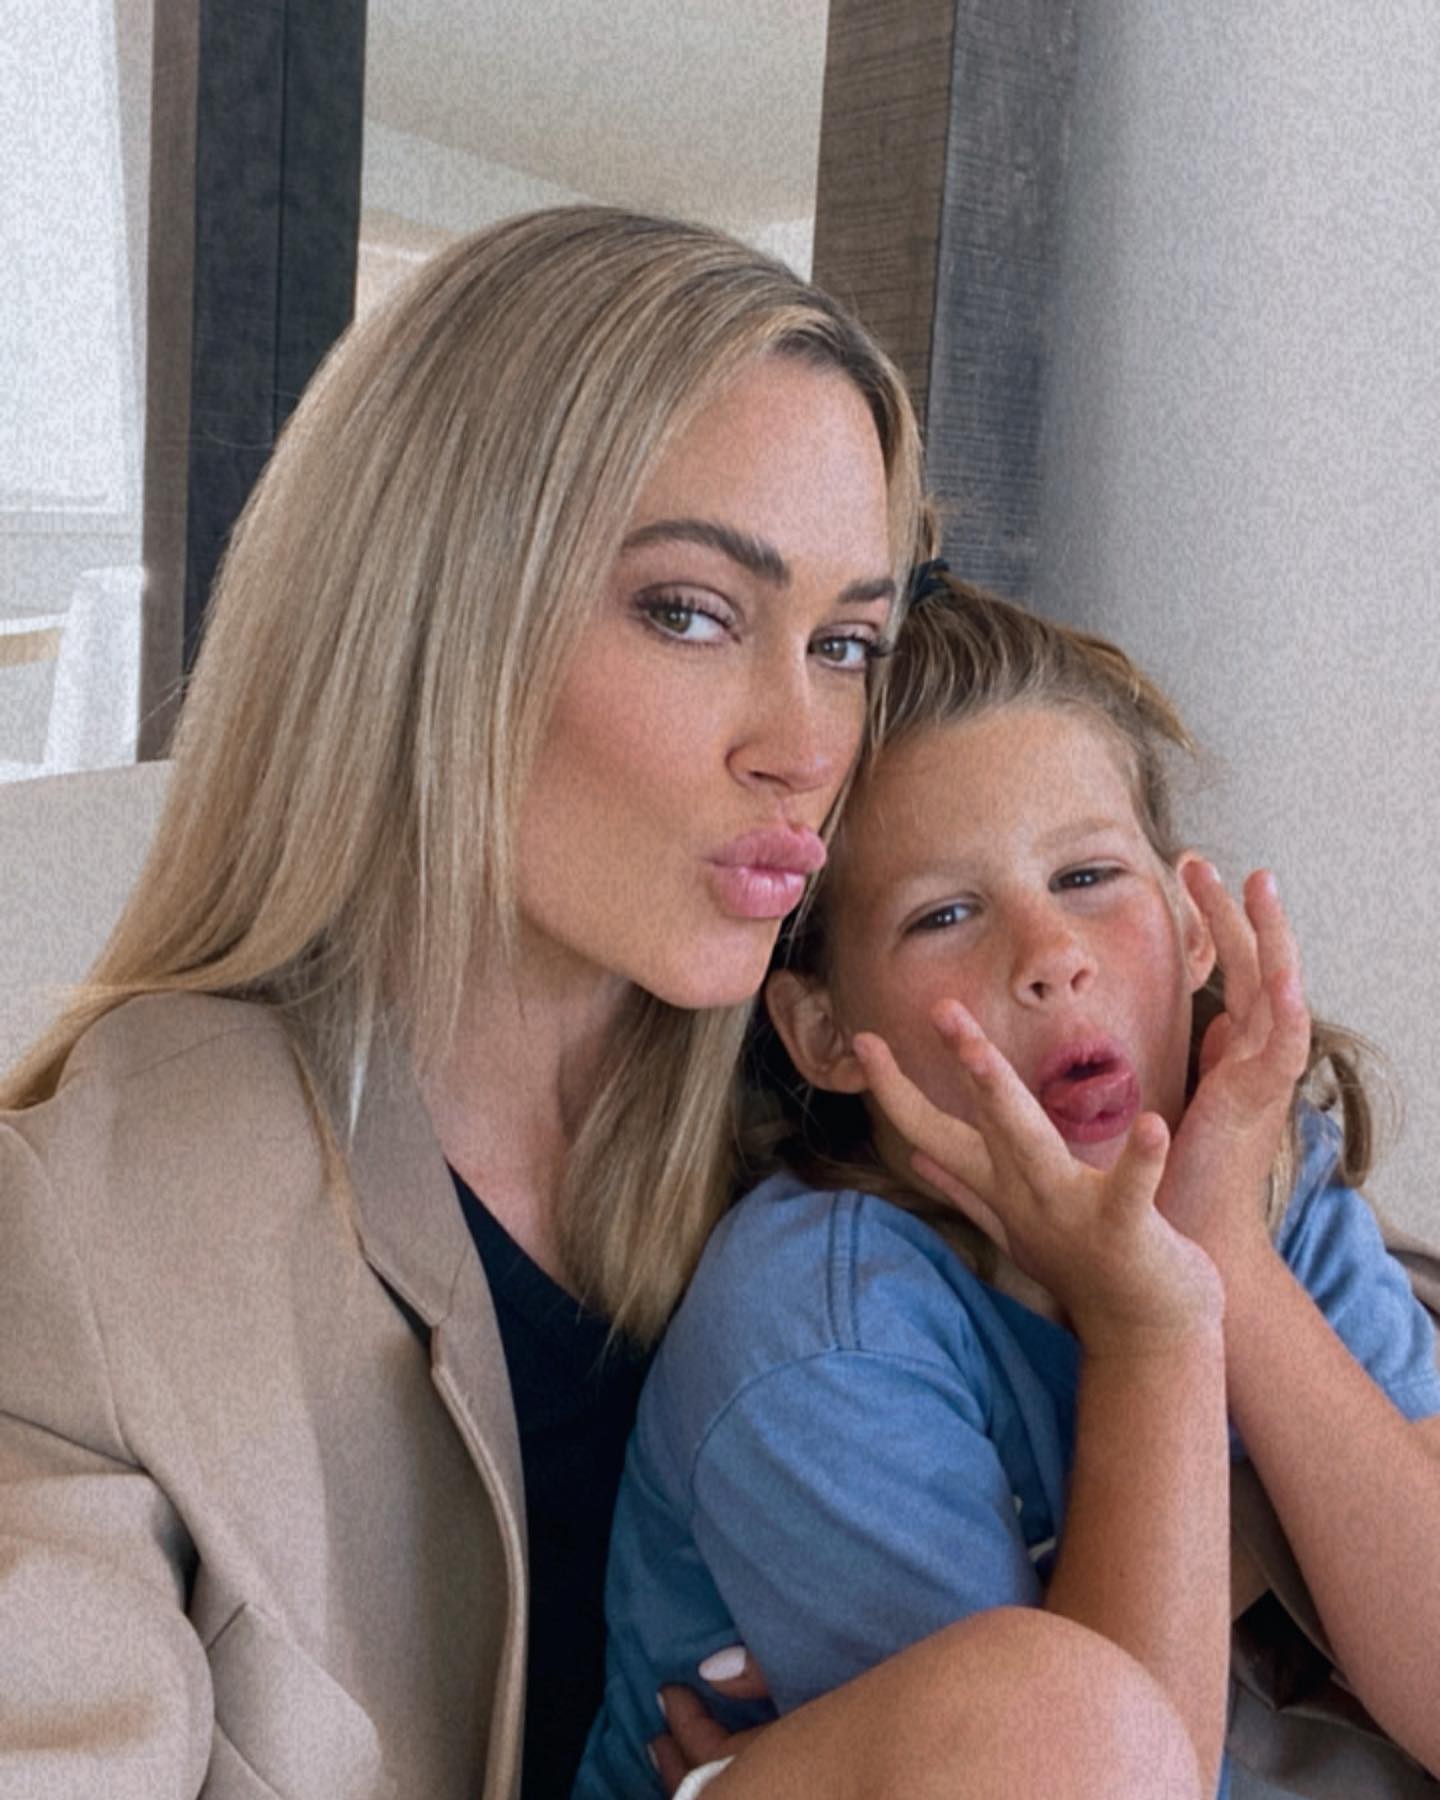 ‘My Twin’! DWTS’ Peta Murgatroyd Shares Silly Selfies With Her Son Shai